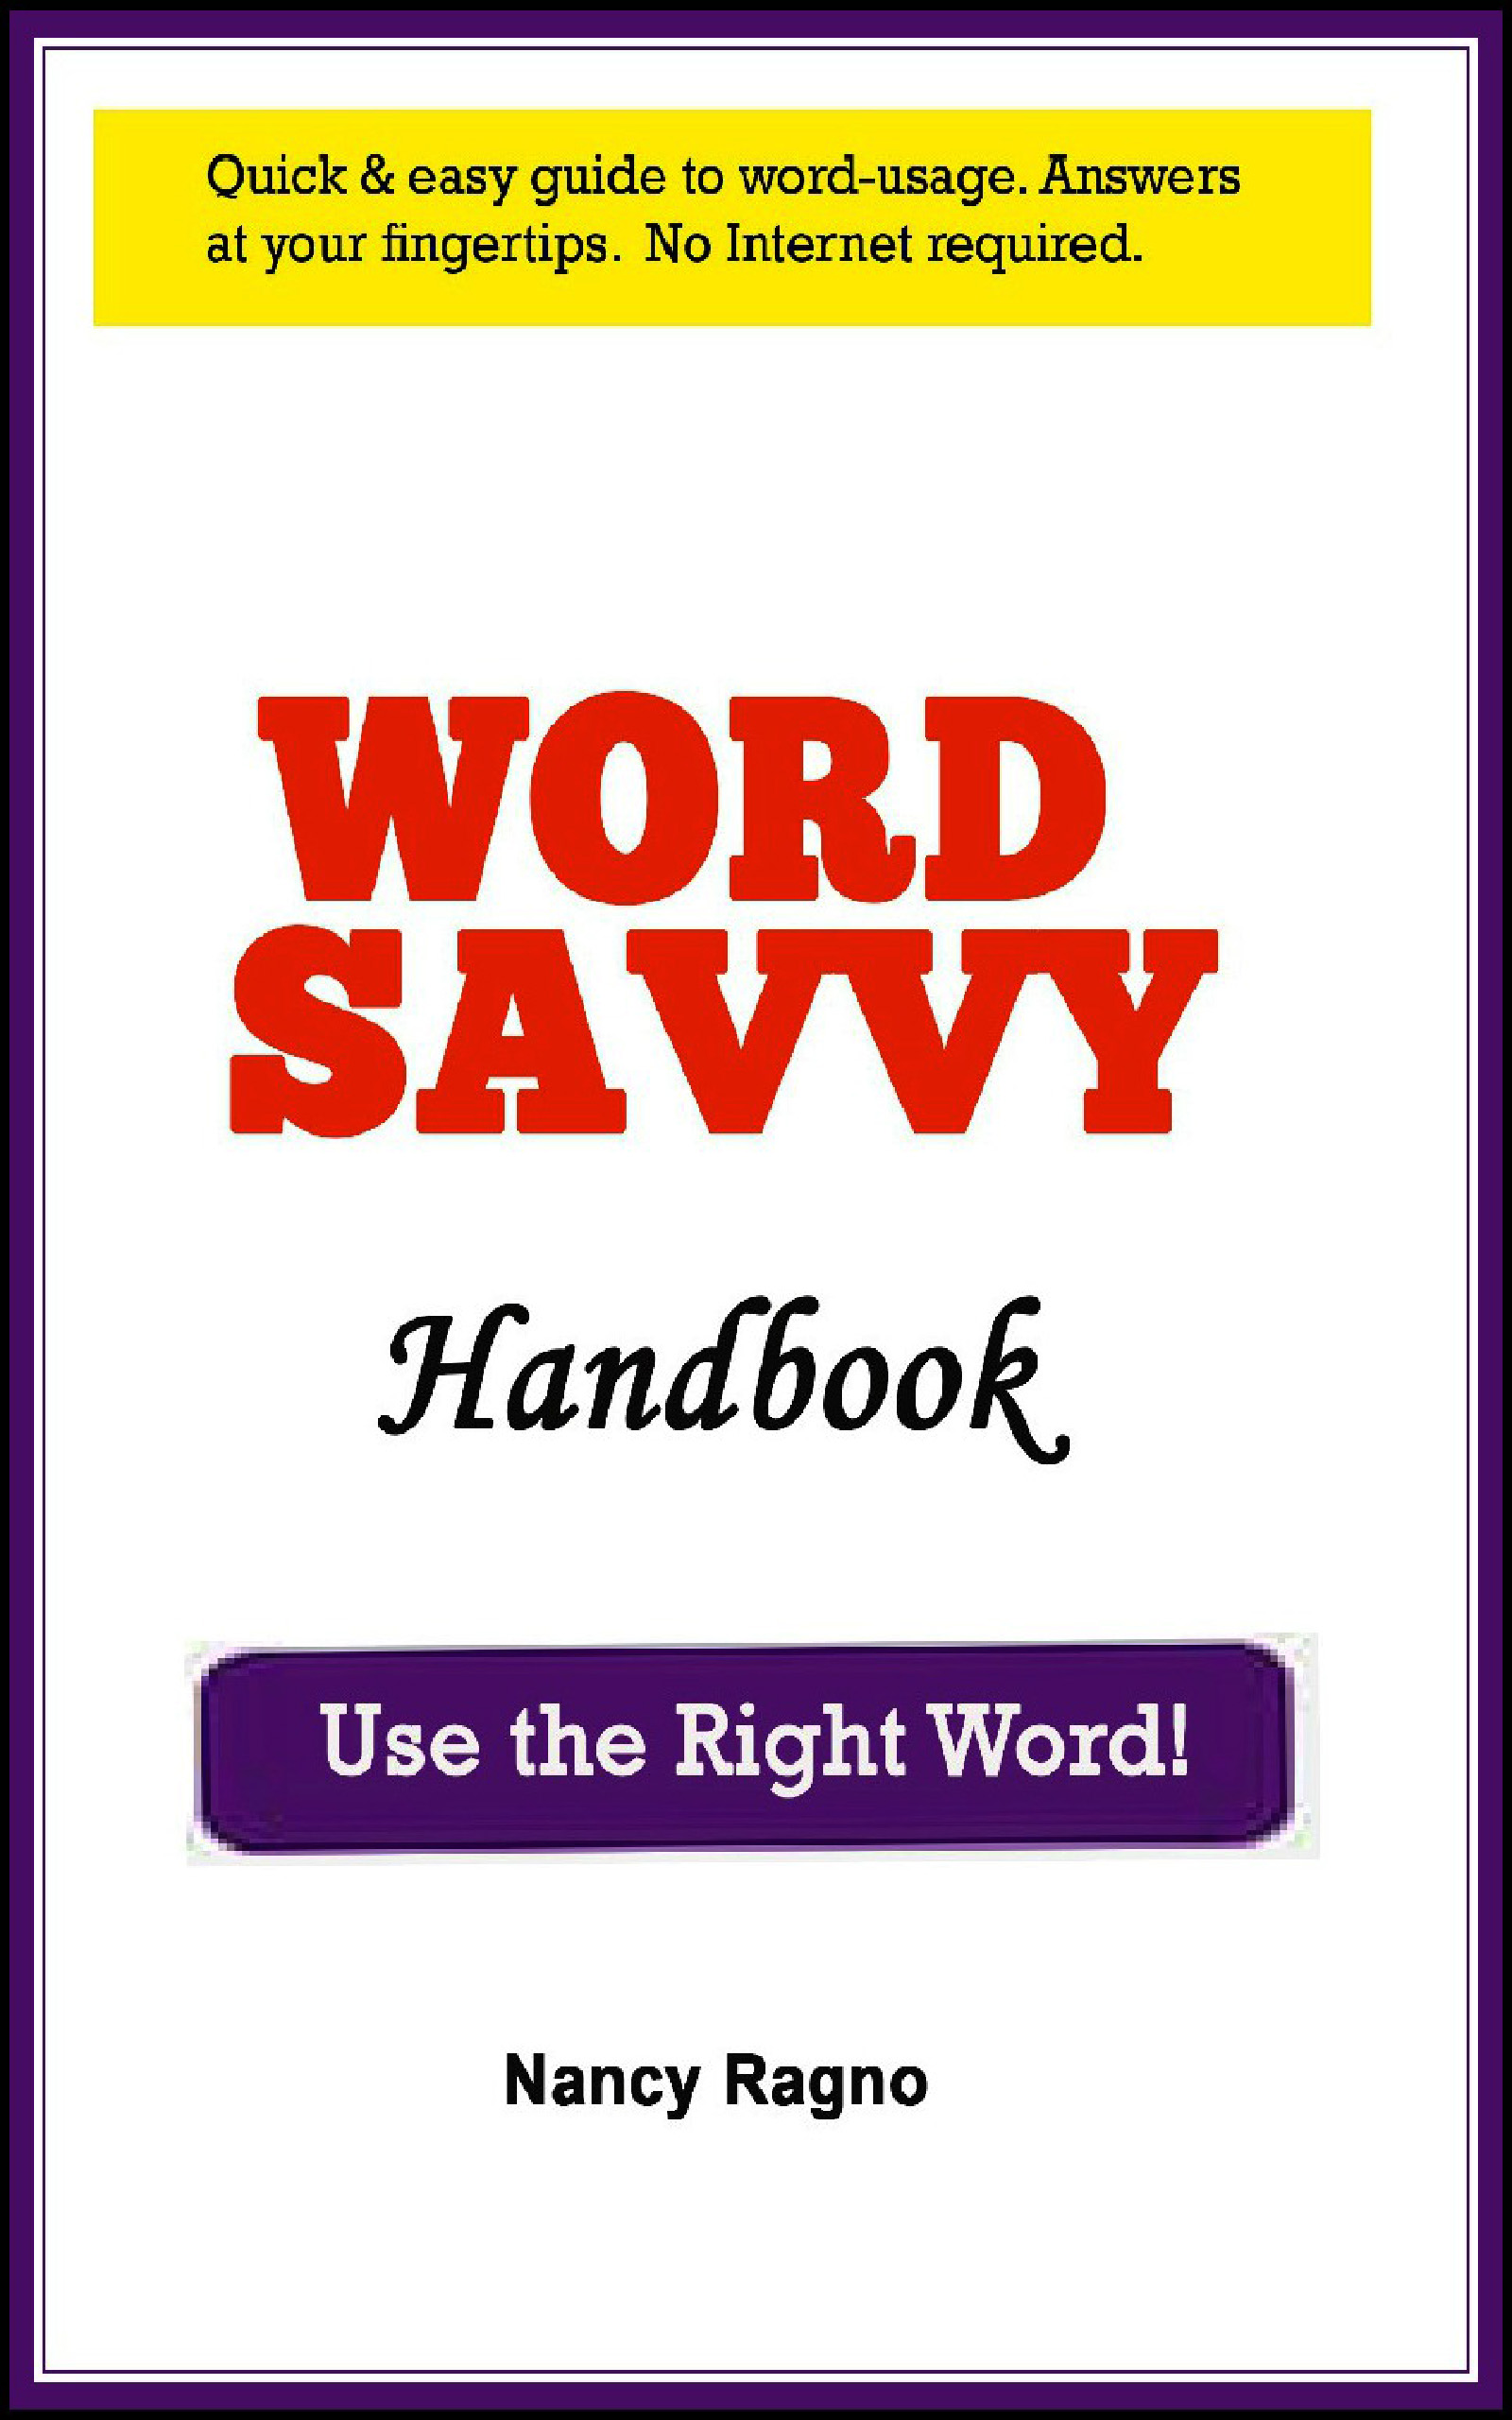 FREE: Word Savvy: Use the Right Word! by Nancy Ragno